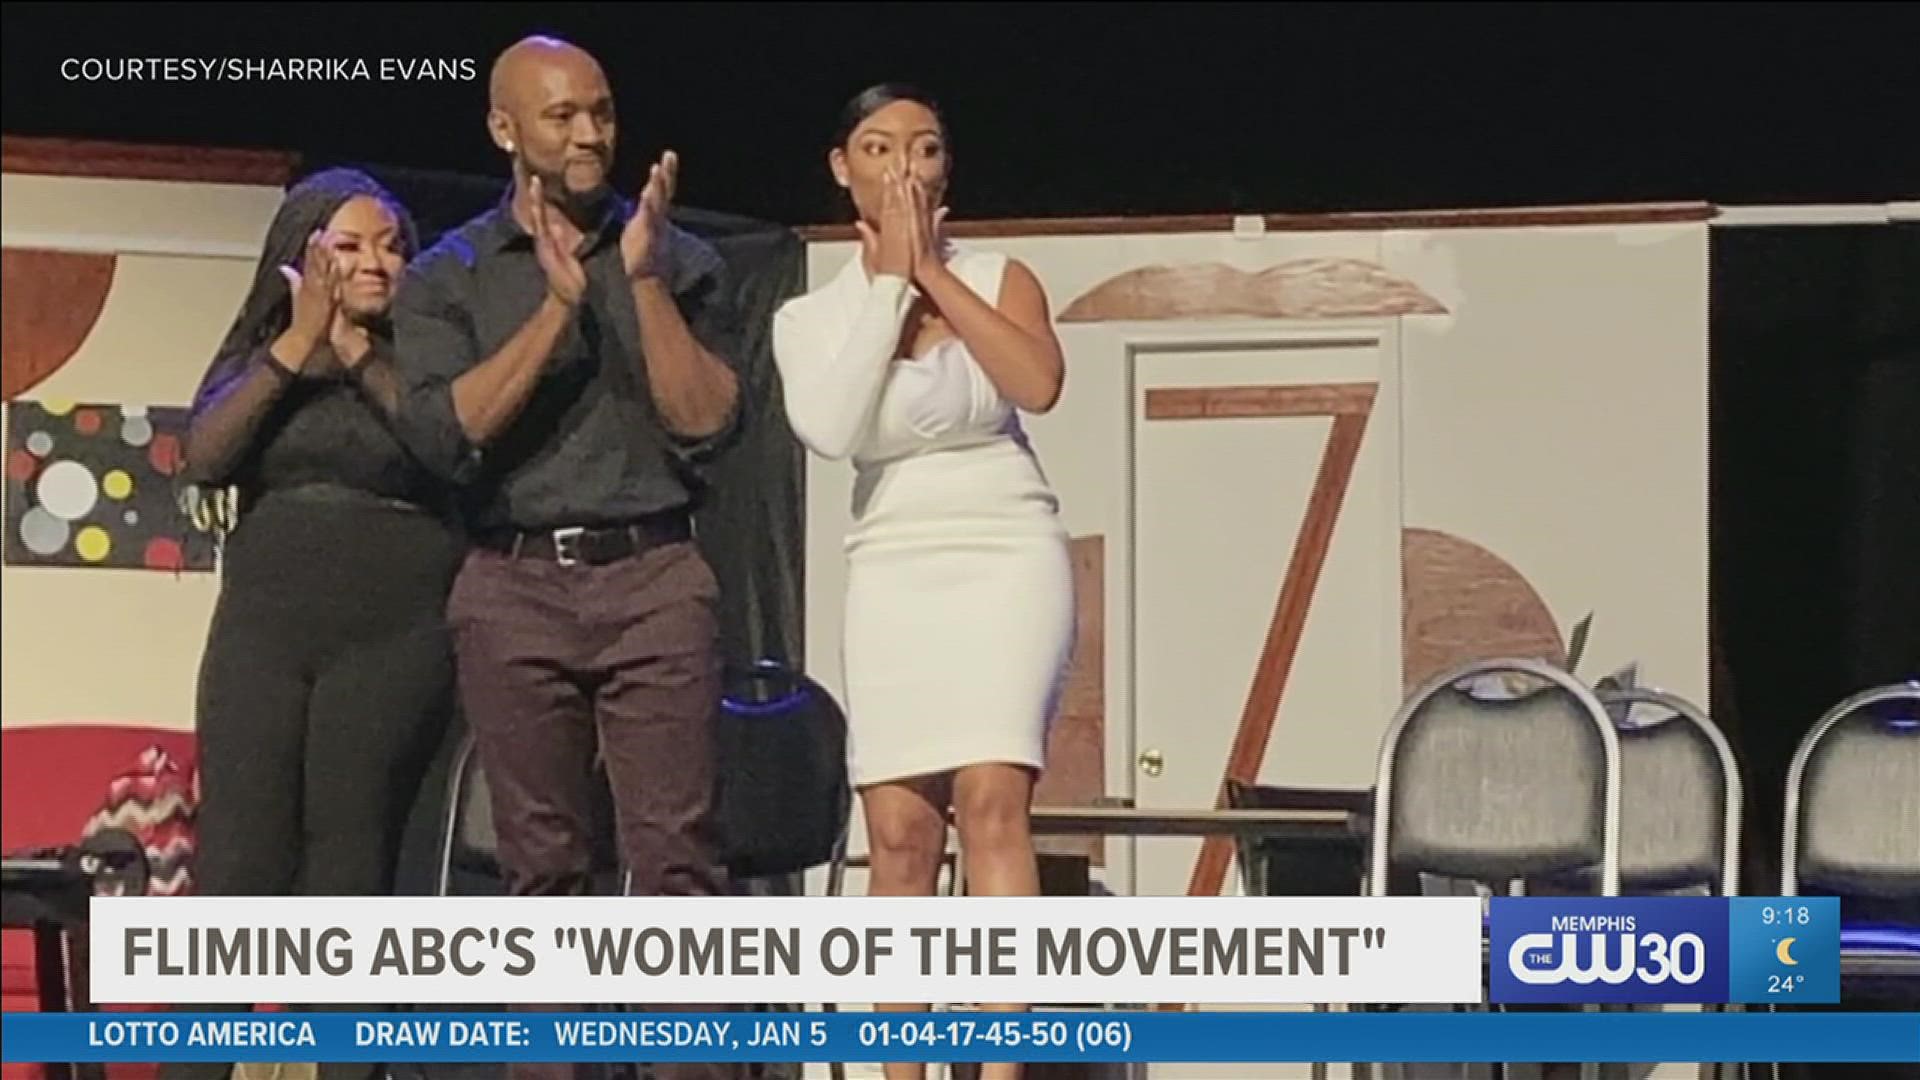 ABC's 'Women of the Movement' is a six-part drama series about the murder of Emmitt Till and how his mother, Mamie Till-Mobley, became an activist.